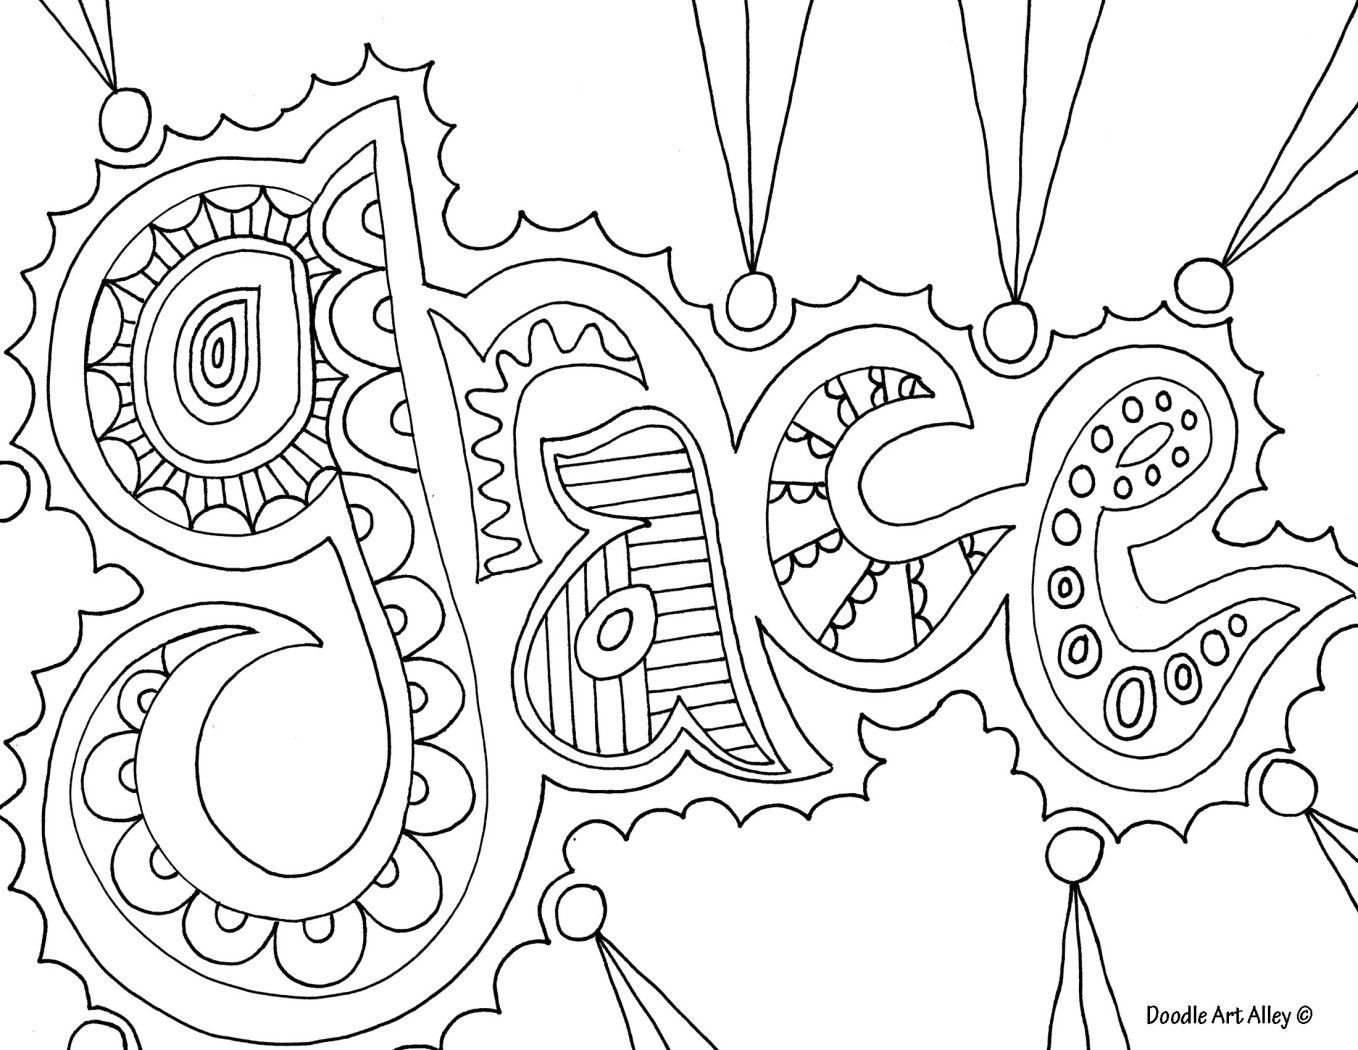 Word Girl Coloring Pages
 Doodle art grace nice coloring page for older kids